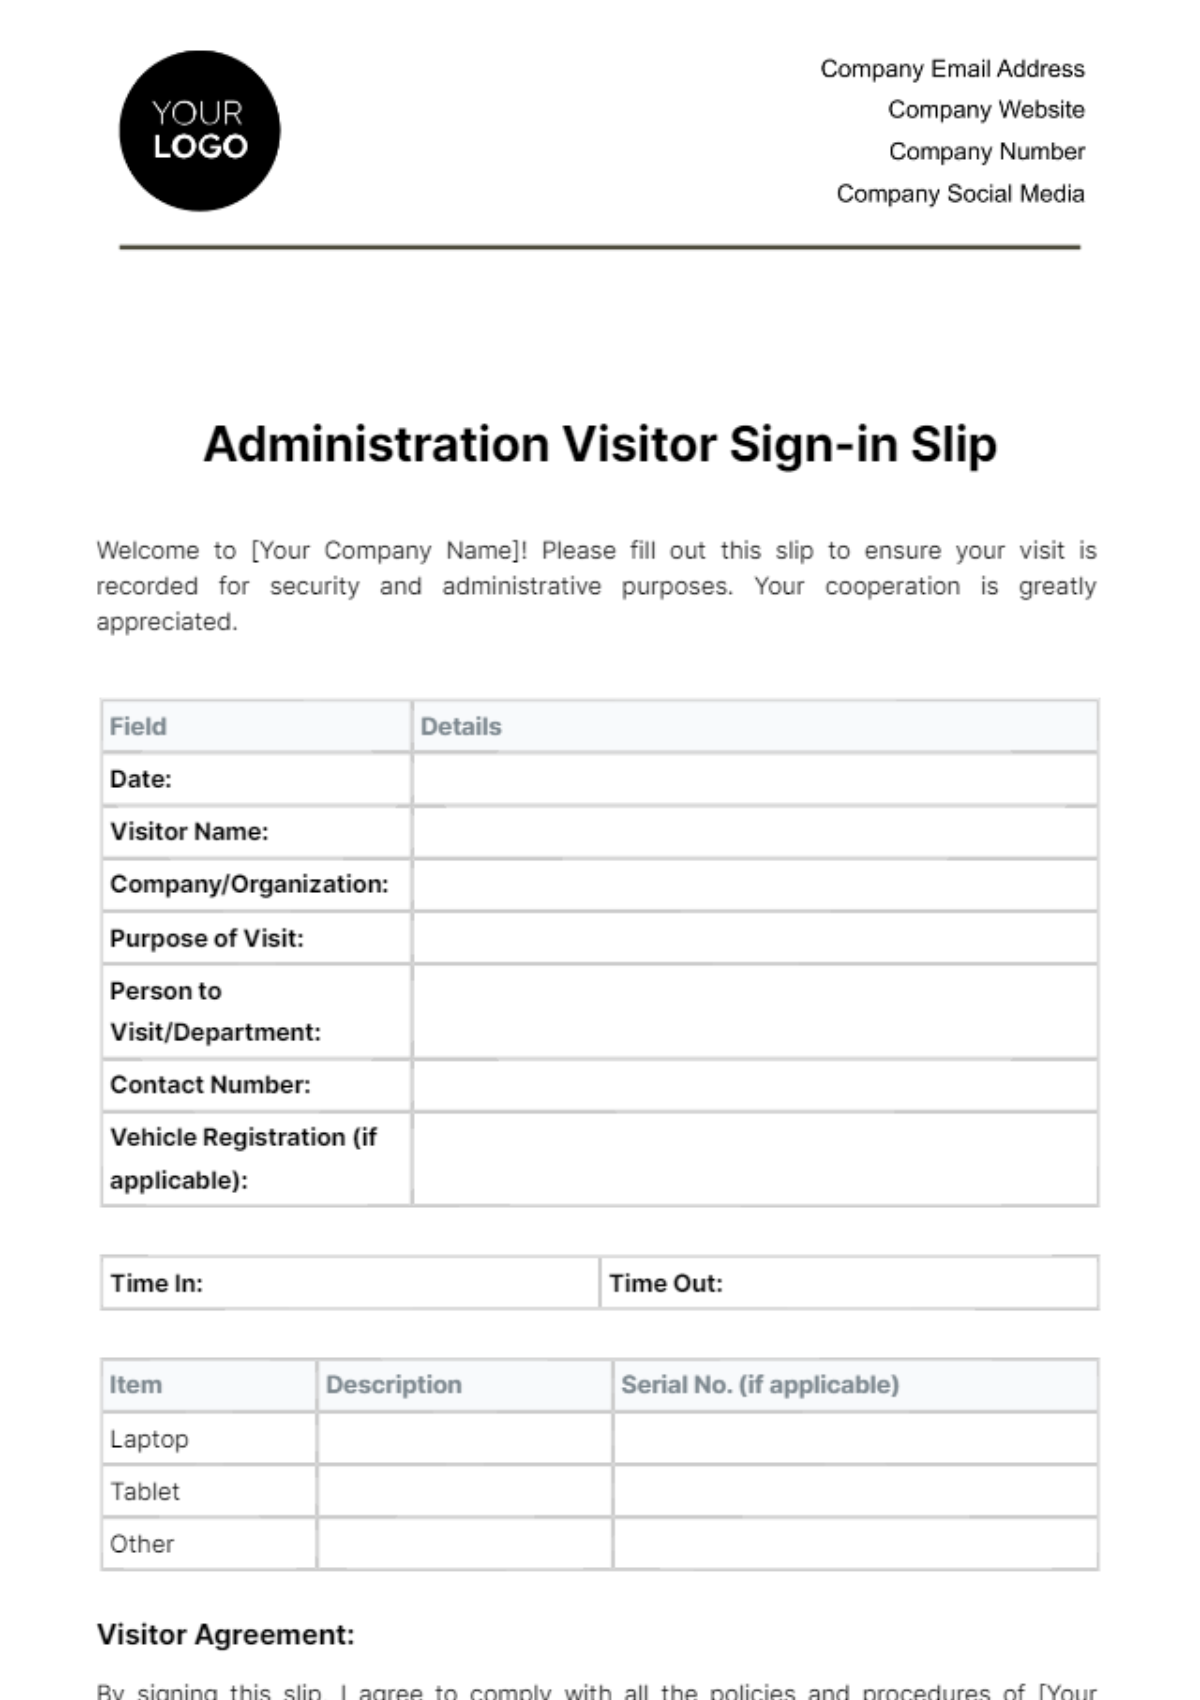 Administration Visitor Sign-in Slip Template